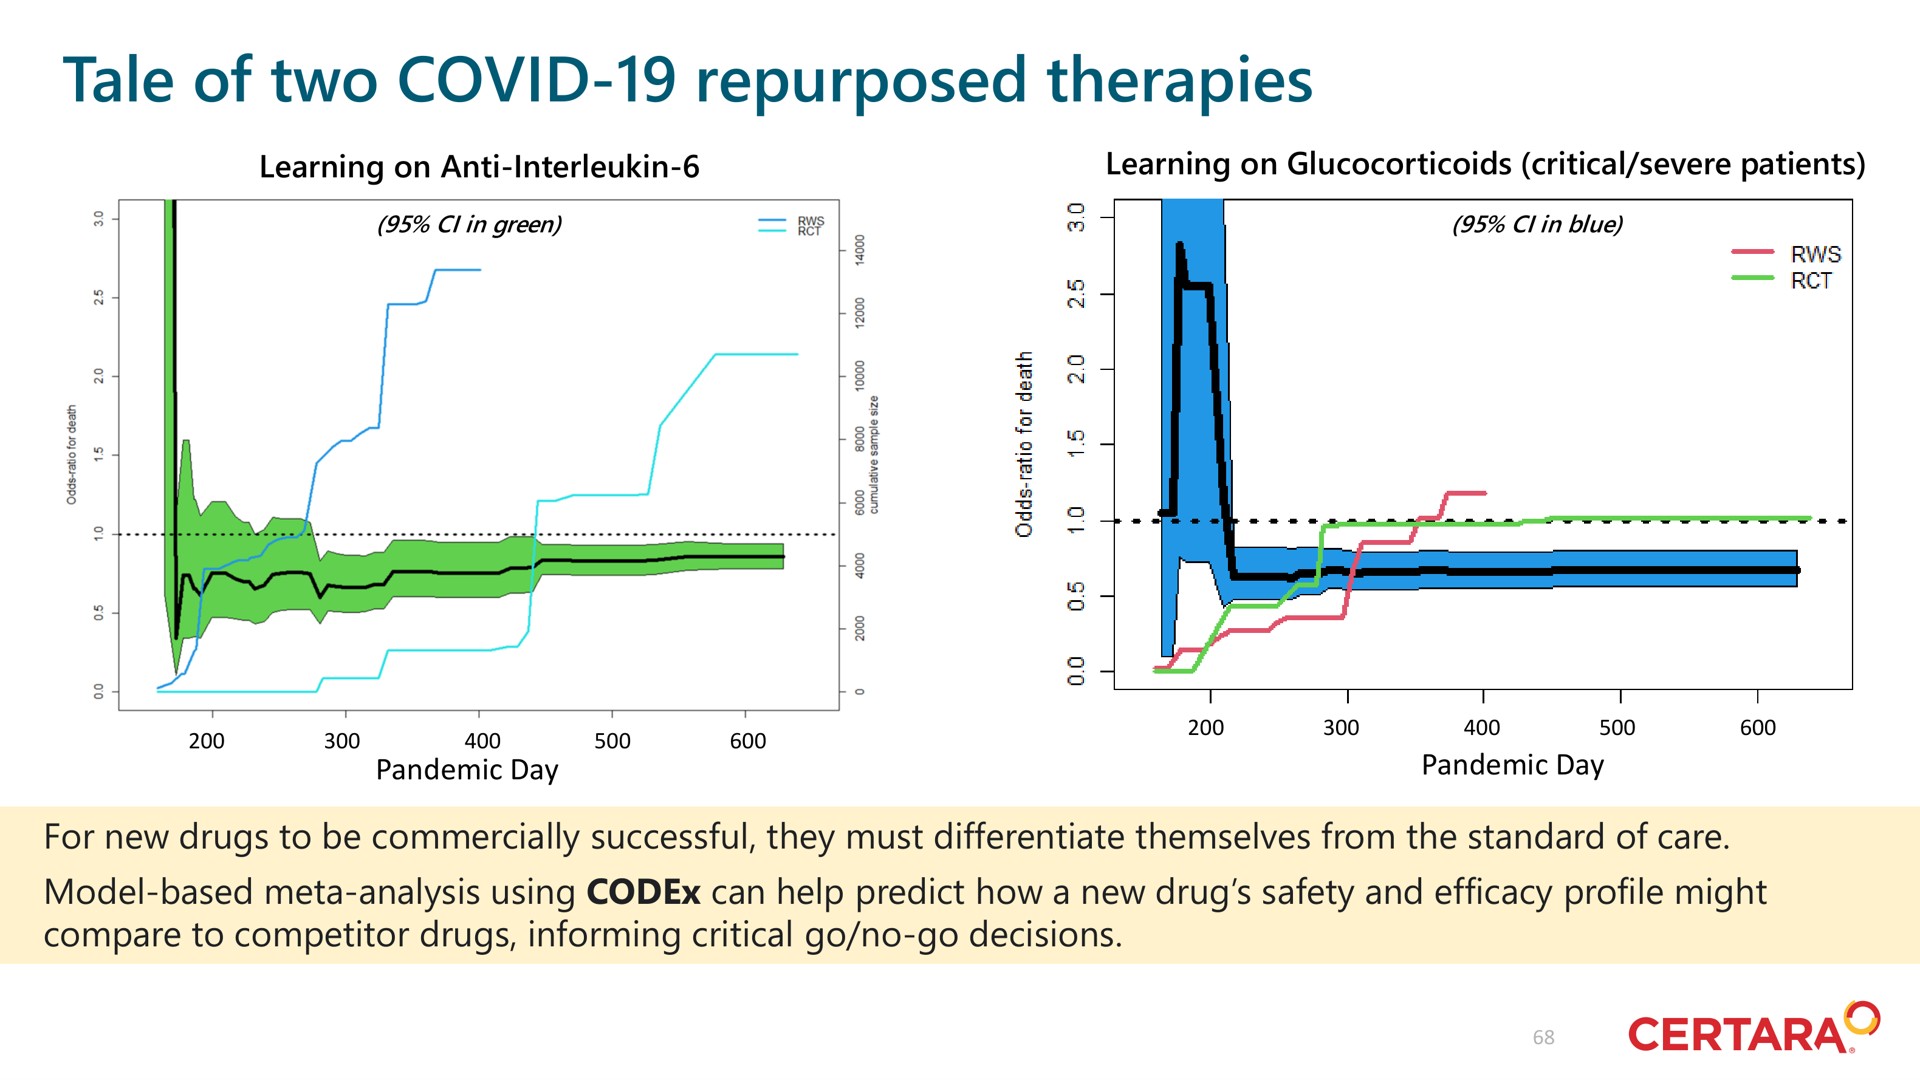 tale of two covid therapies | Certara